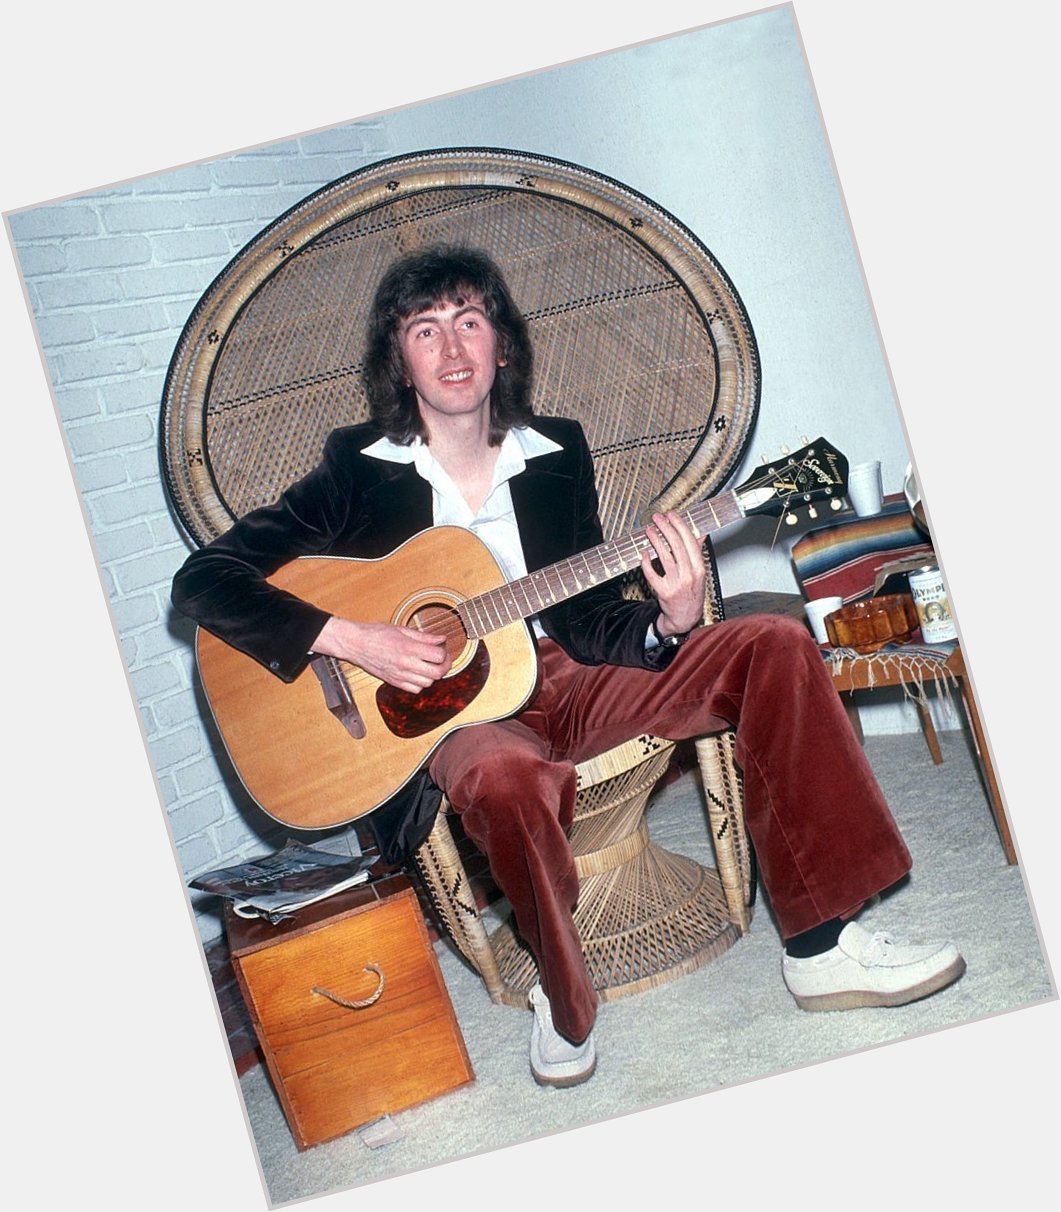 Happy Birthday to Al Stewart who turns 77 years young today - pictured here at his Los Angeles home in 1976 